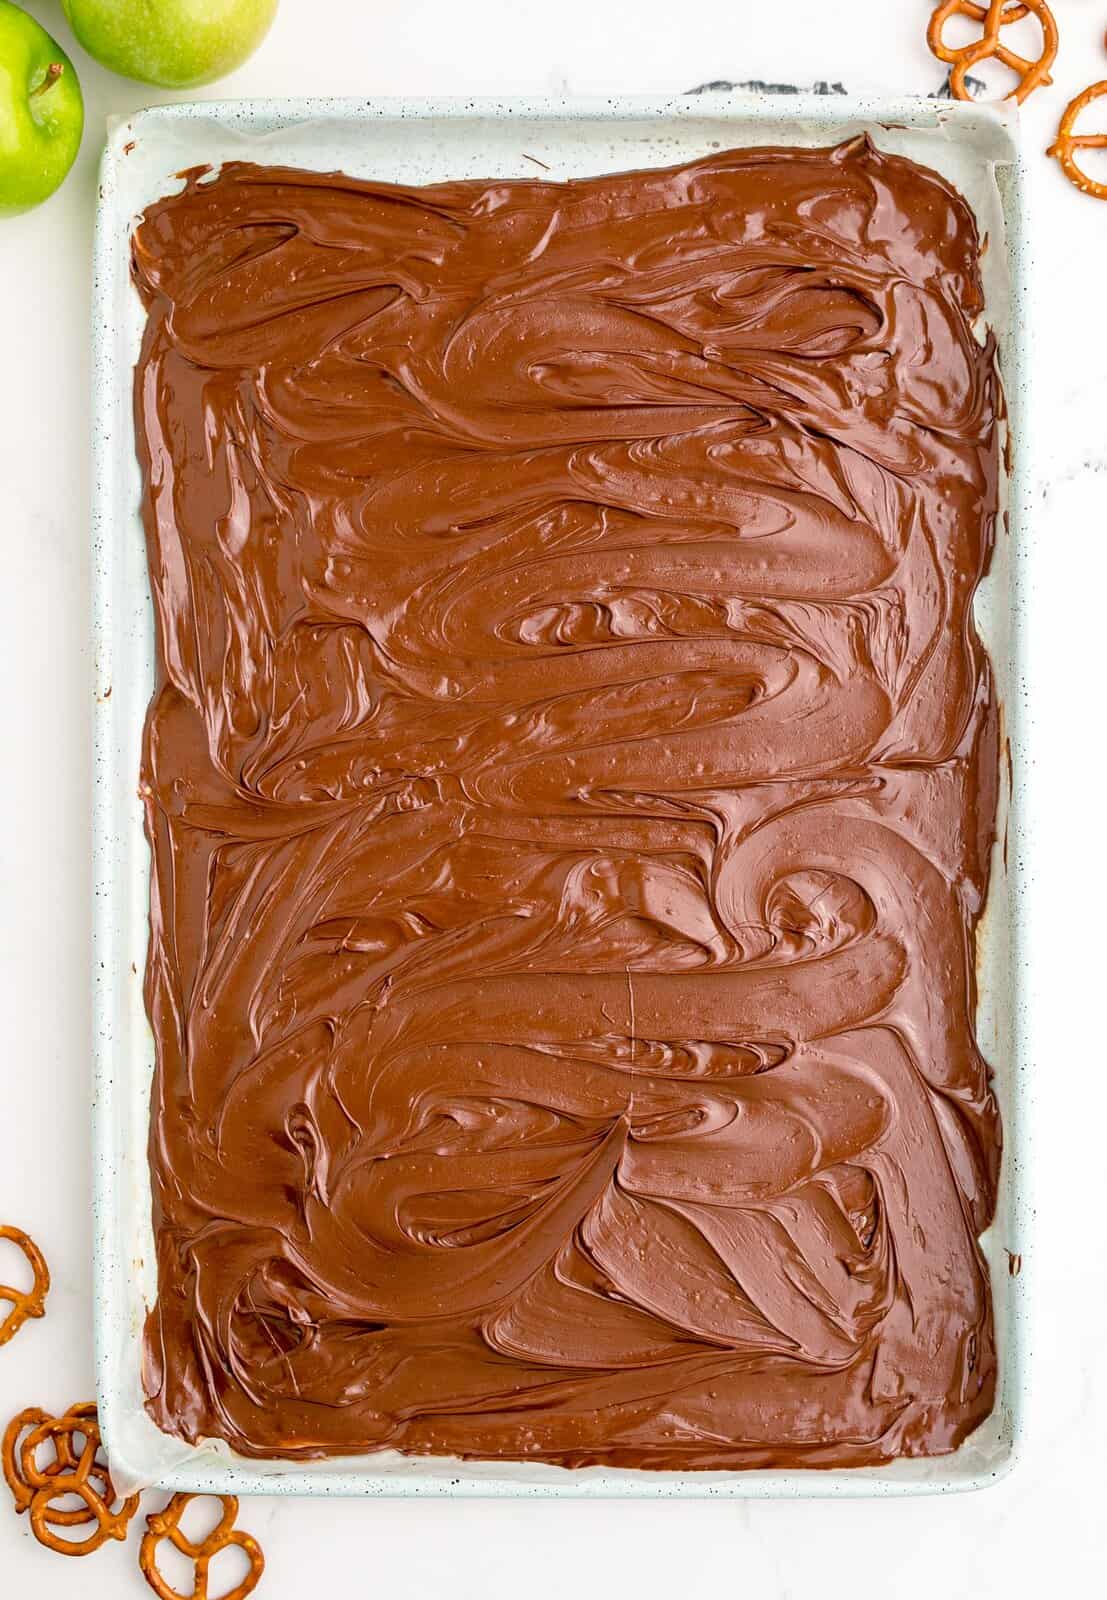 Melted chocolate spread out over parchment lined baking sheet.